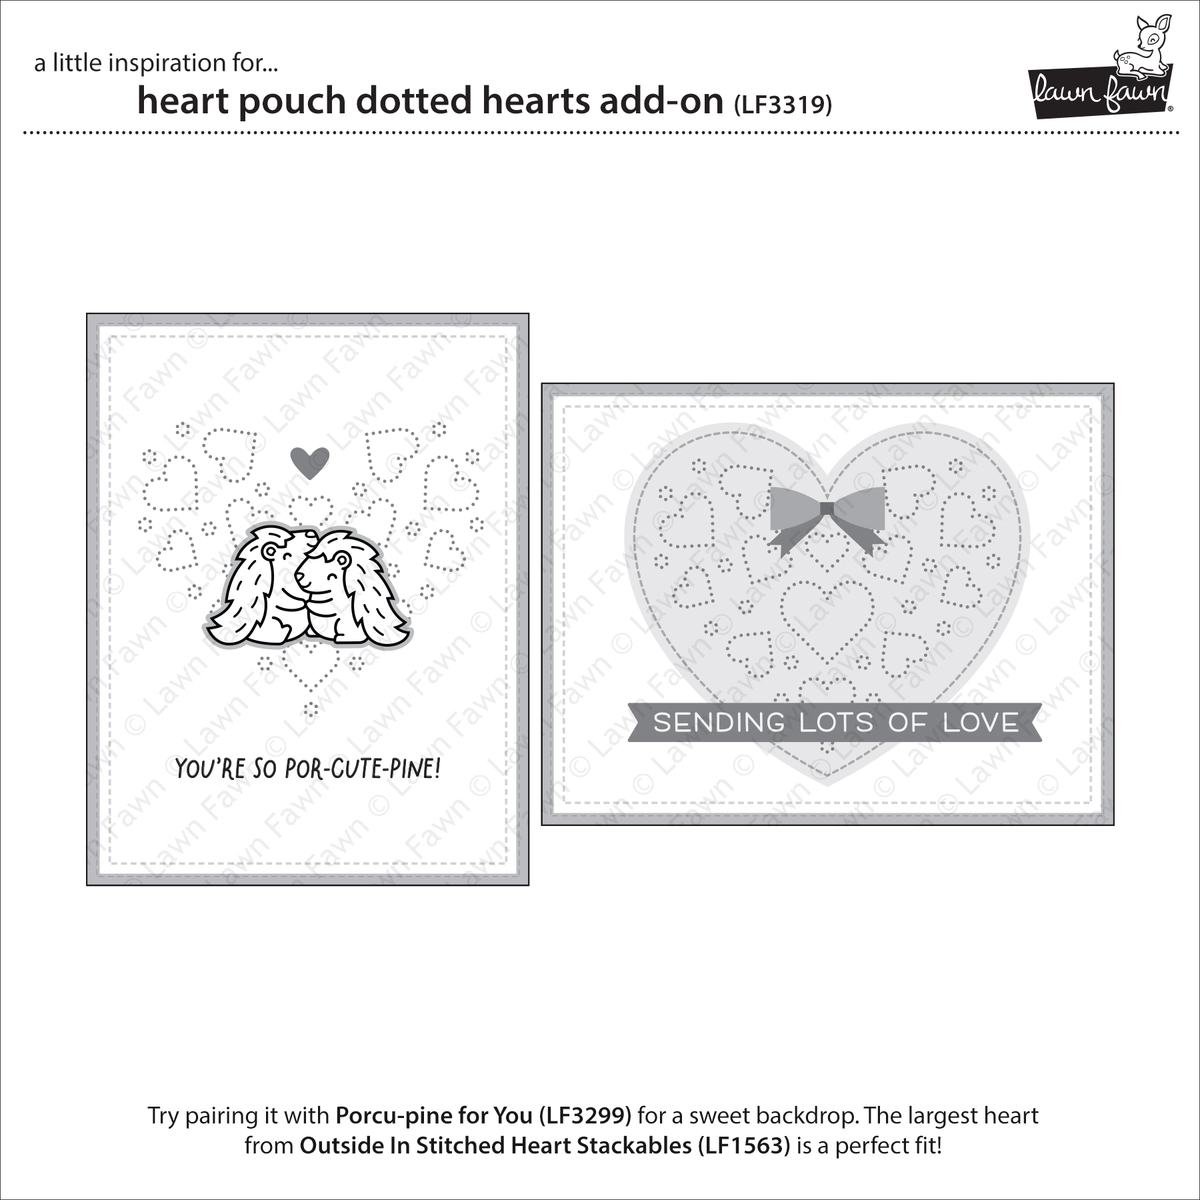 Stanzen Heart Pouch Dotted Hearts Add-On